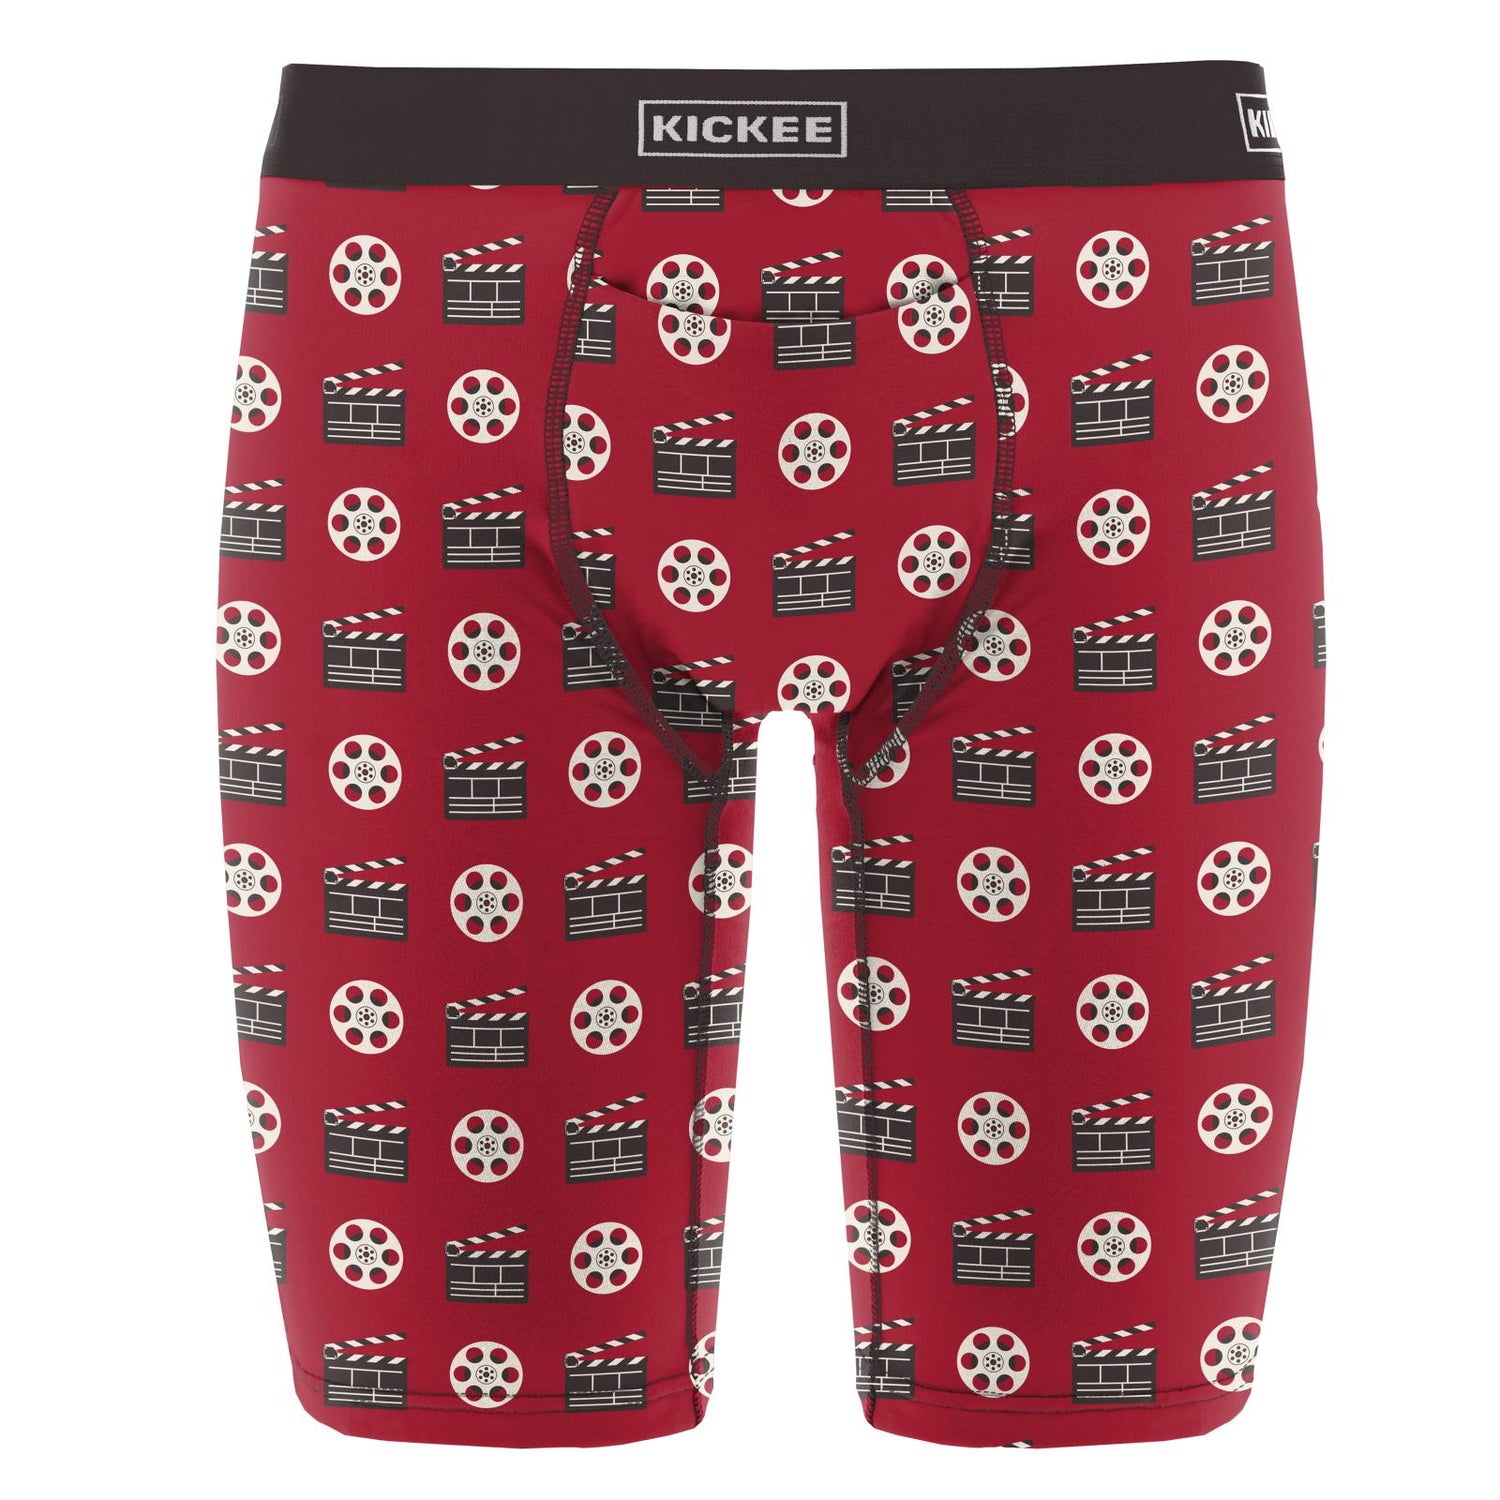 Men's Print Long Boxer Brief with Top Fly in Candy Apple Clapper Board and Film